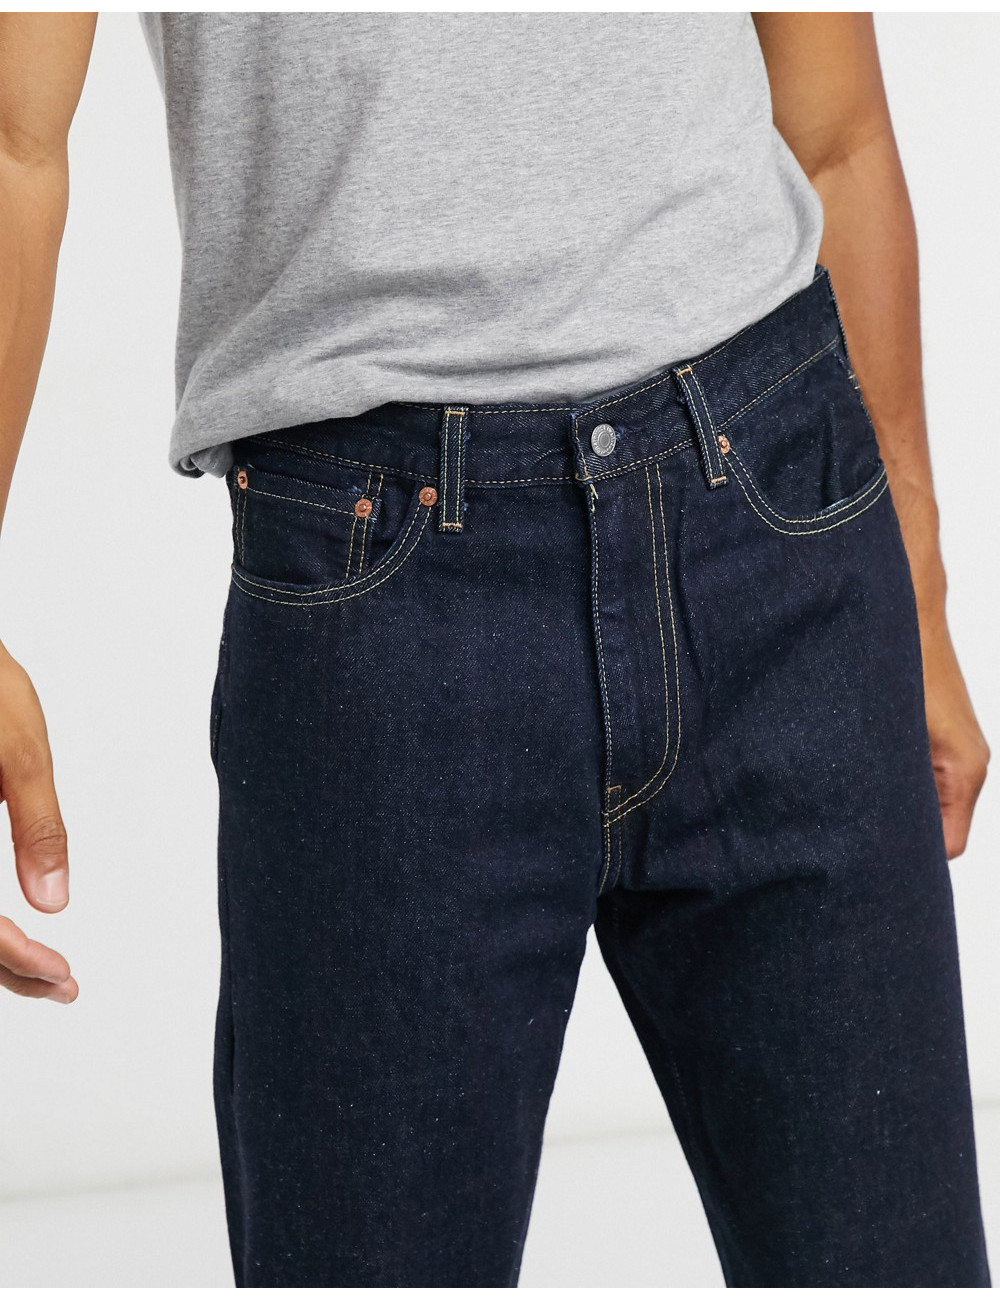 Levi's stay loose fit jeans...